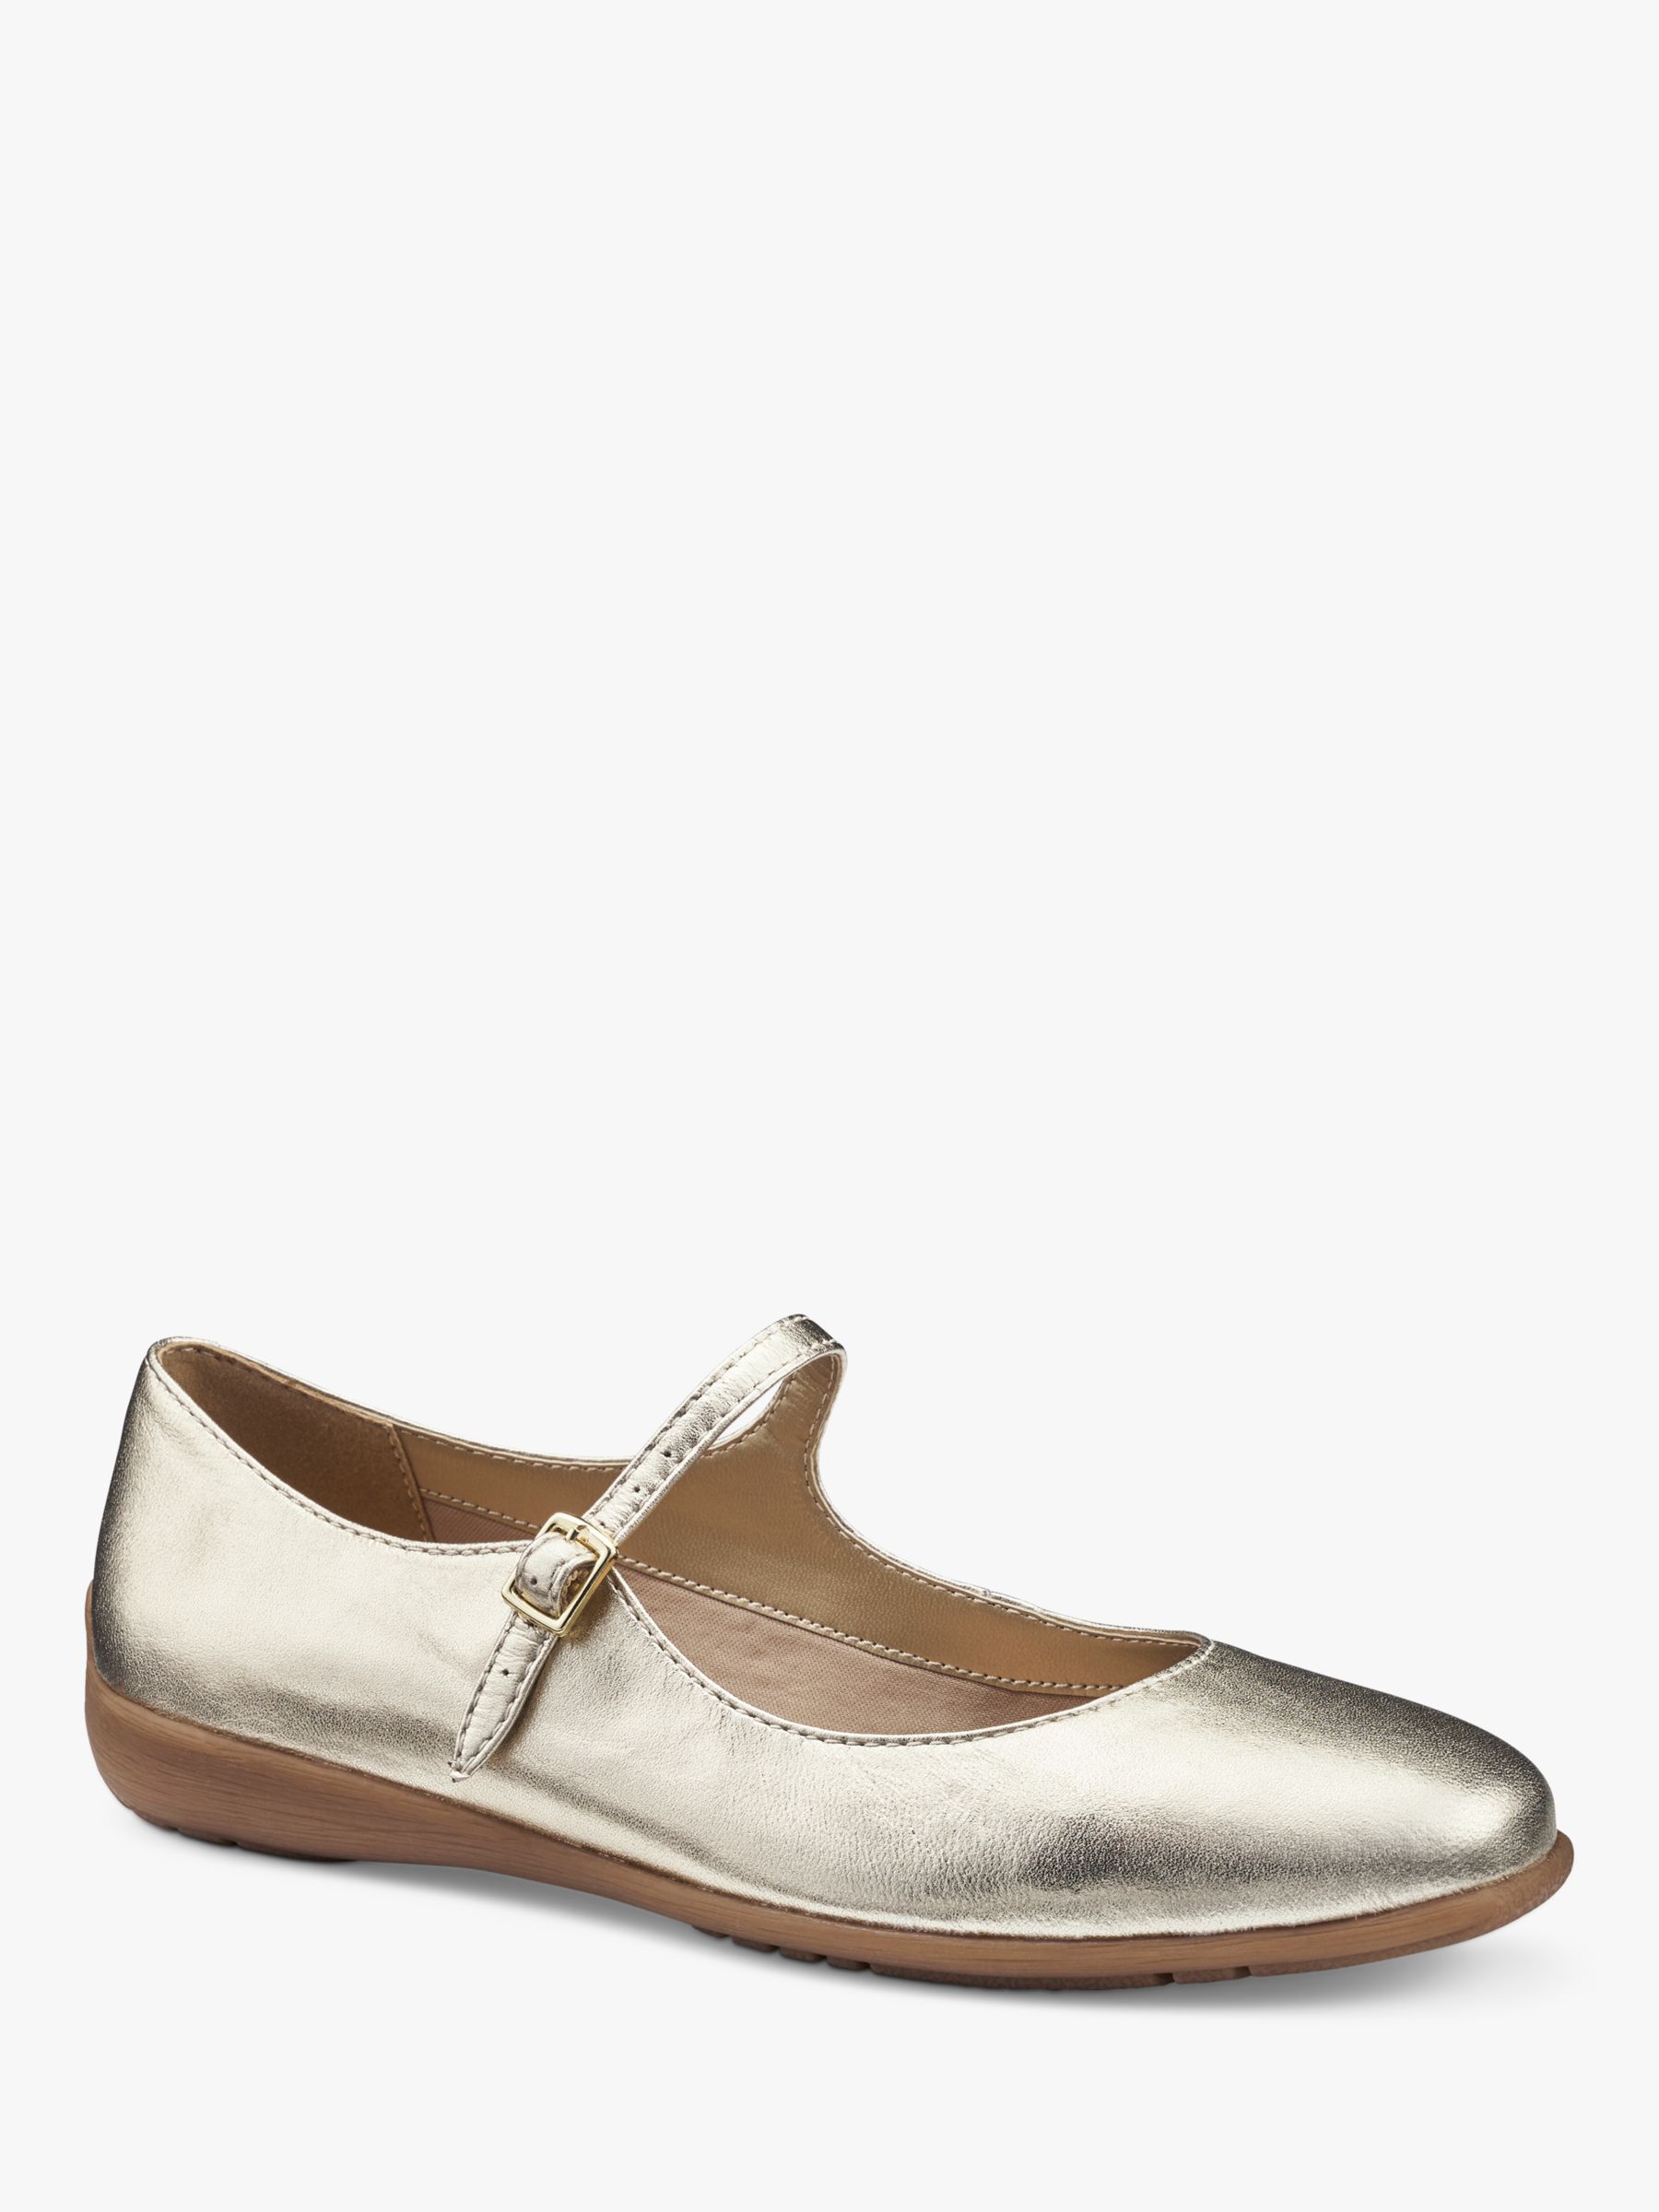 Hotter Selina Chic Mary Jane Shoes, Gold, 6